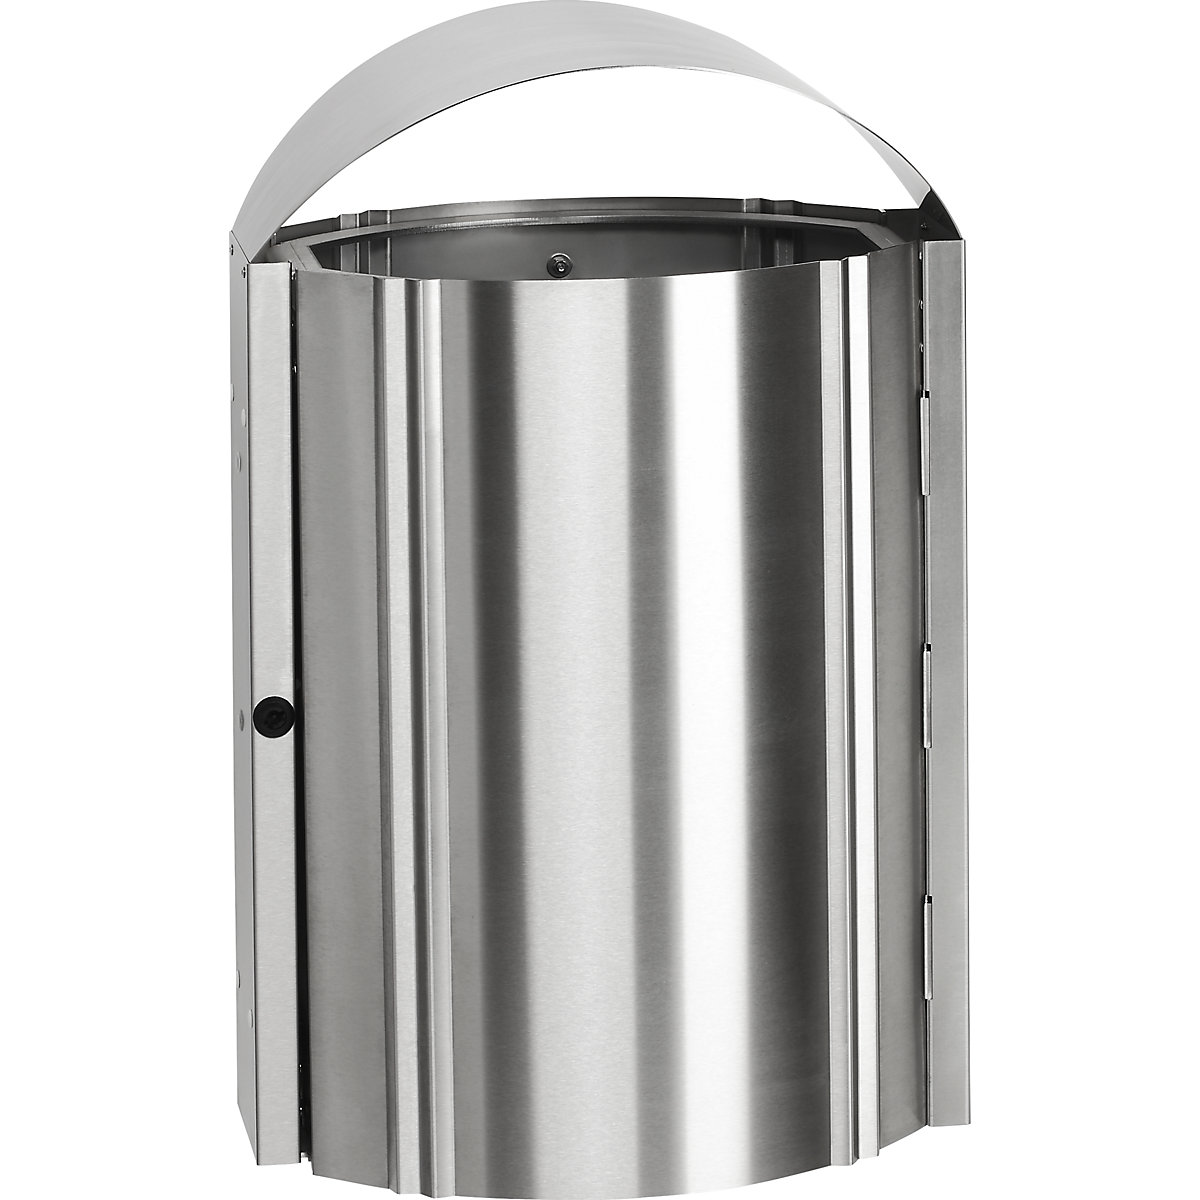 Stainless steel waste collector, outdoor areas – VAR